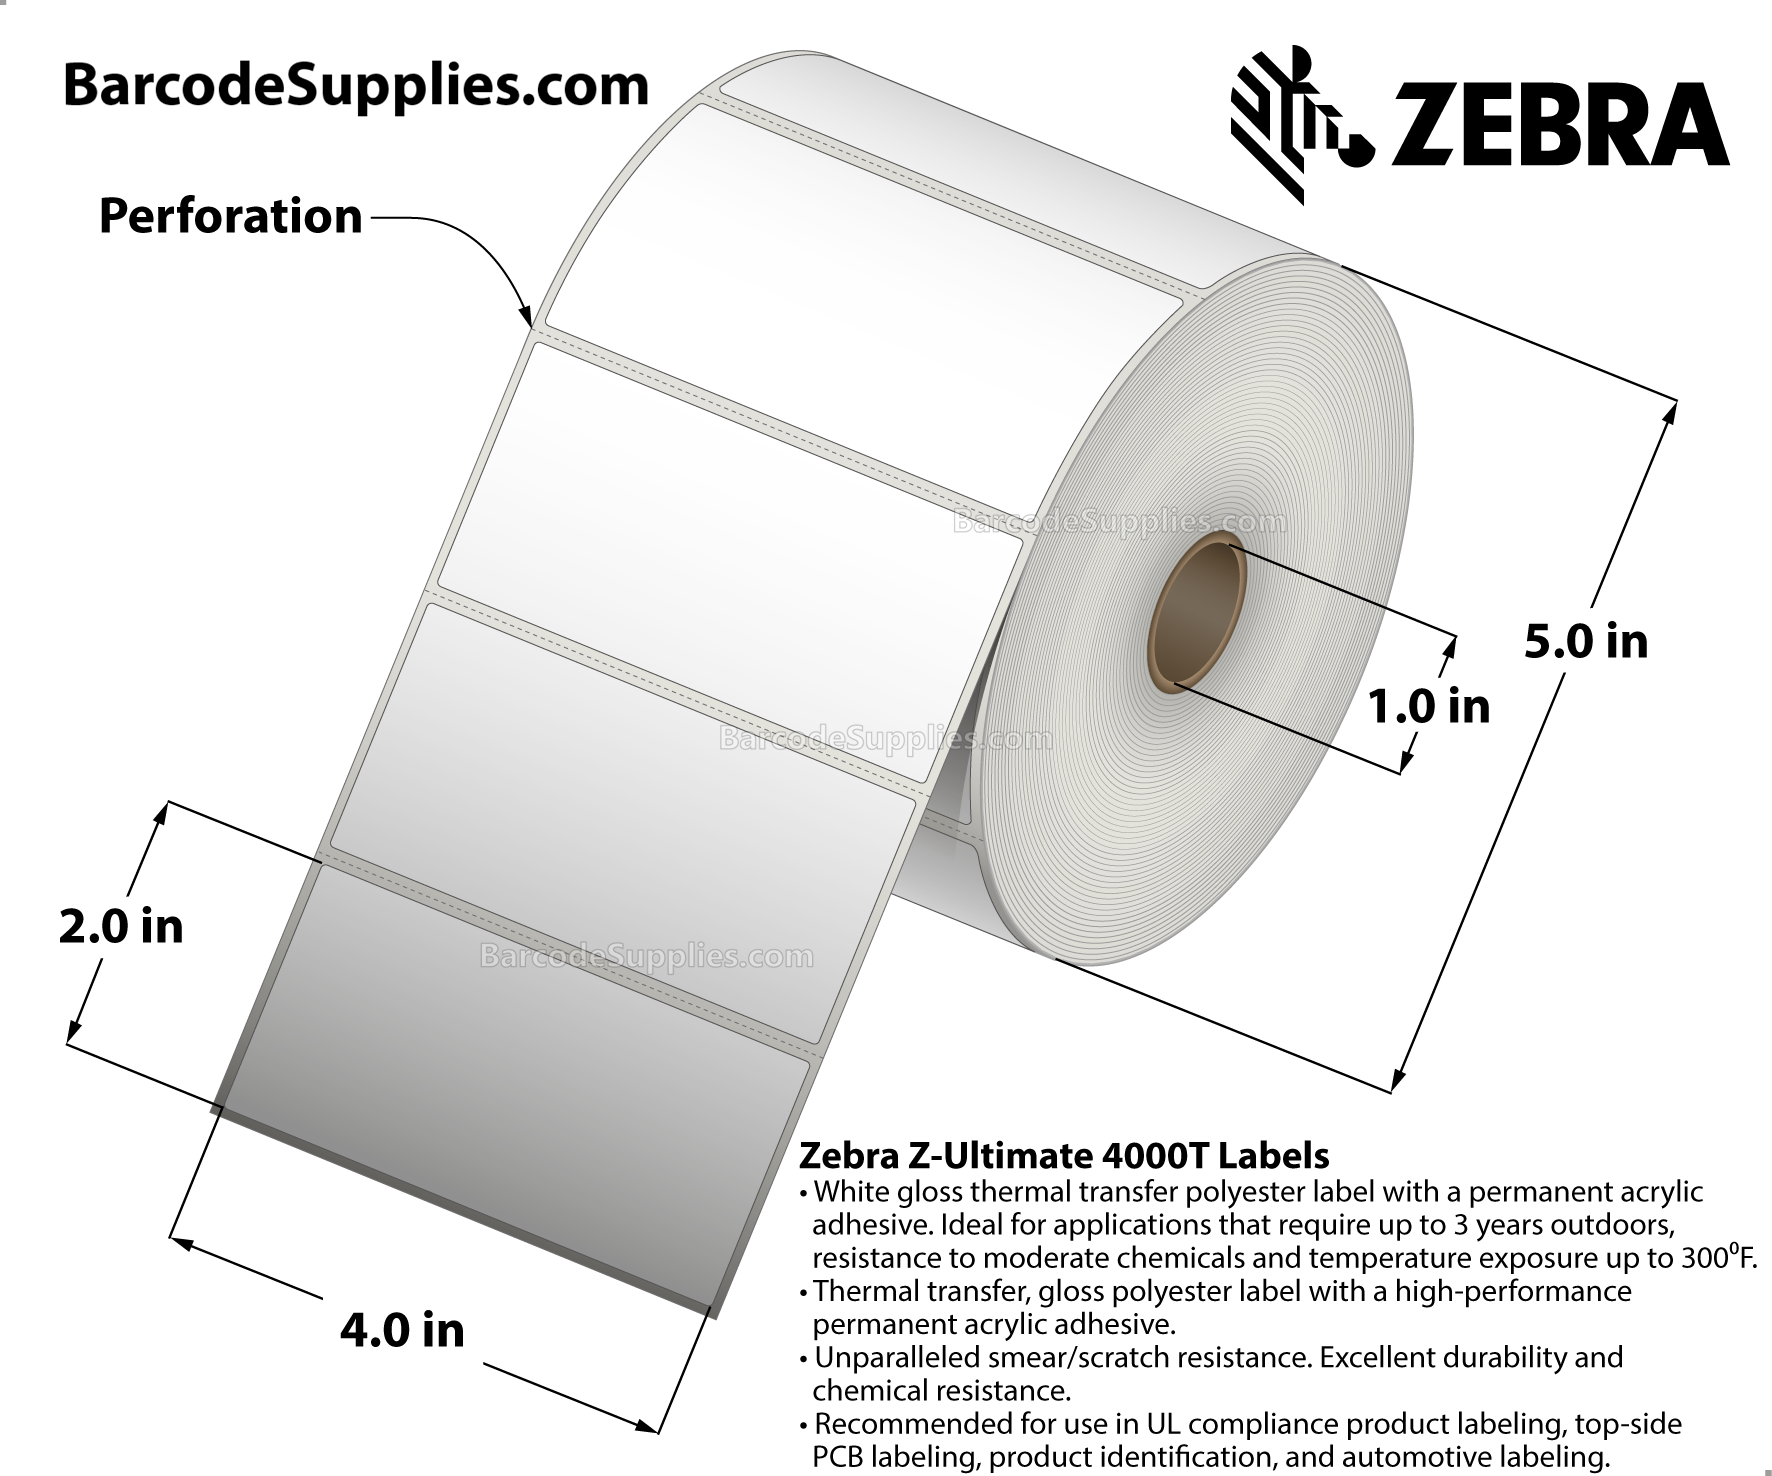 4 x 2 Thermal Transfer White Z-Ultimate 4000T Labels With Permanent Adhesive - Perforated - 1340 Labels Per Roll - Carton Of 4 Rolls - 5360 Labels Total - MPN: 10002631